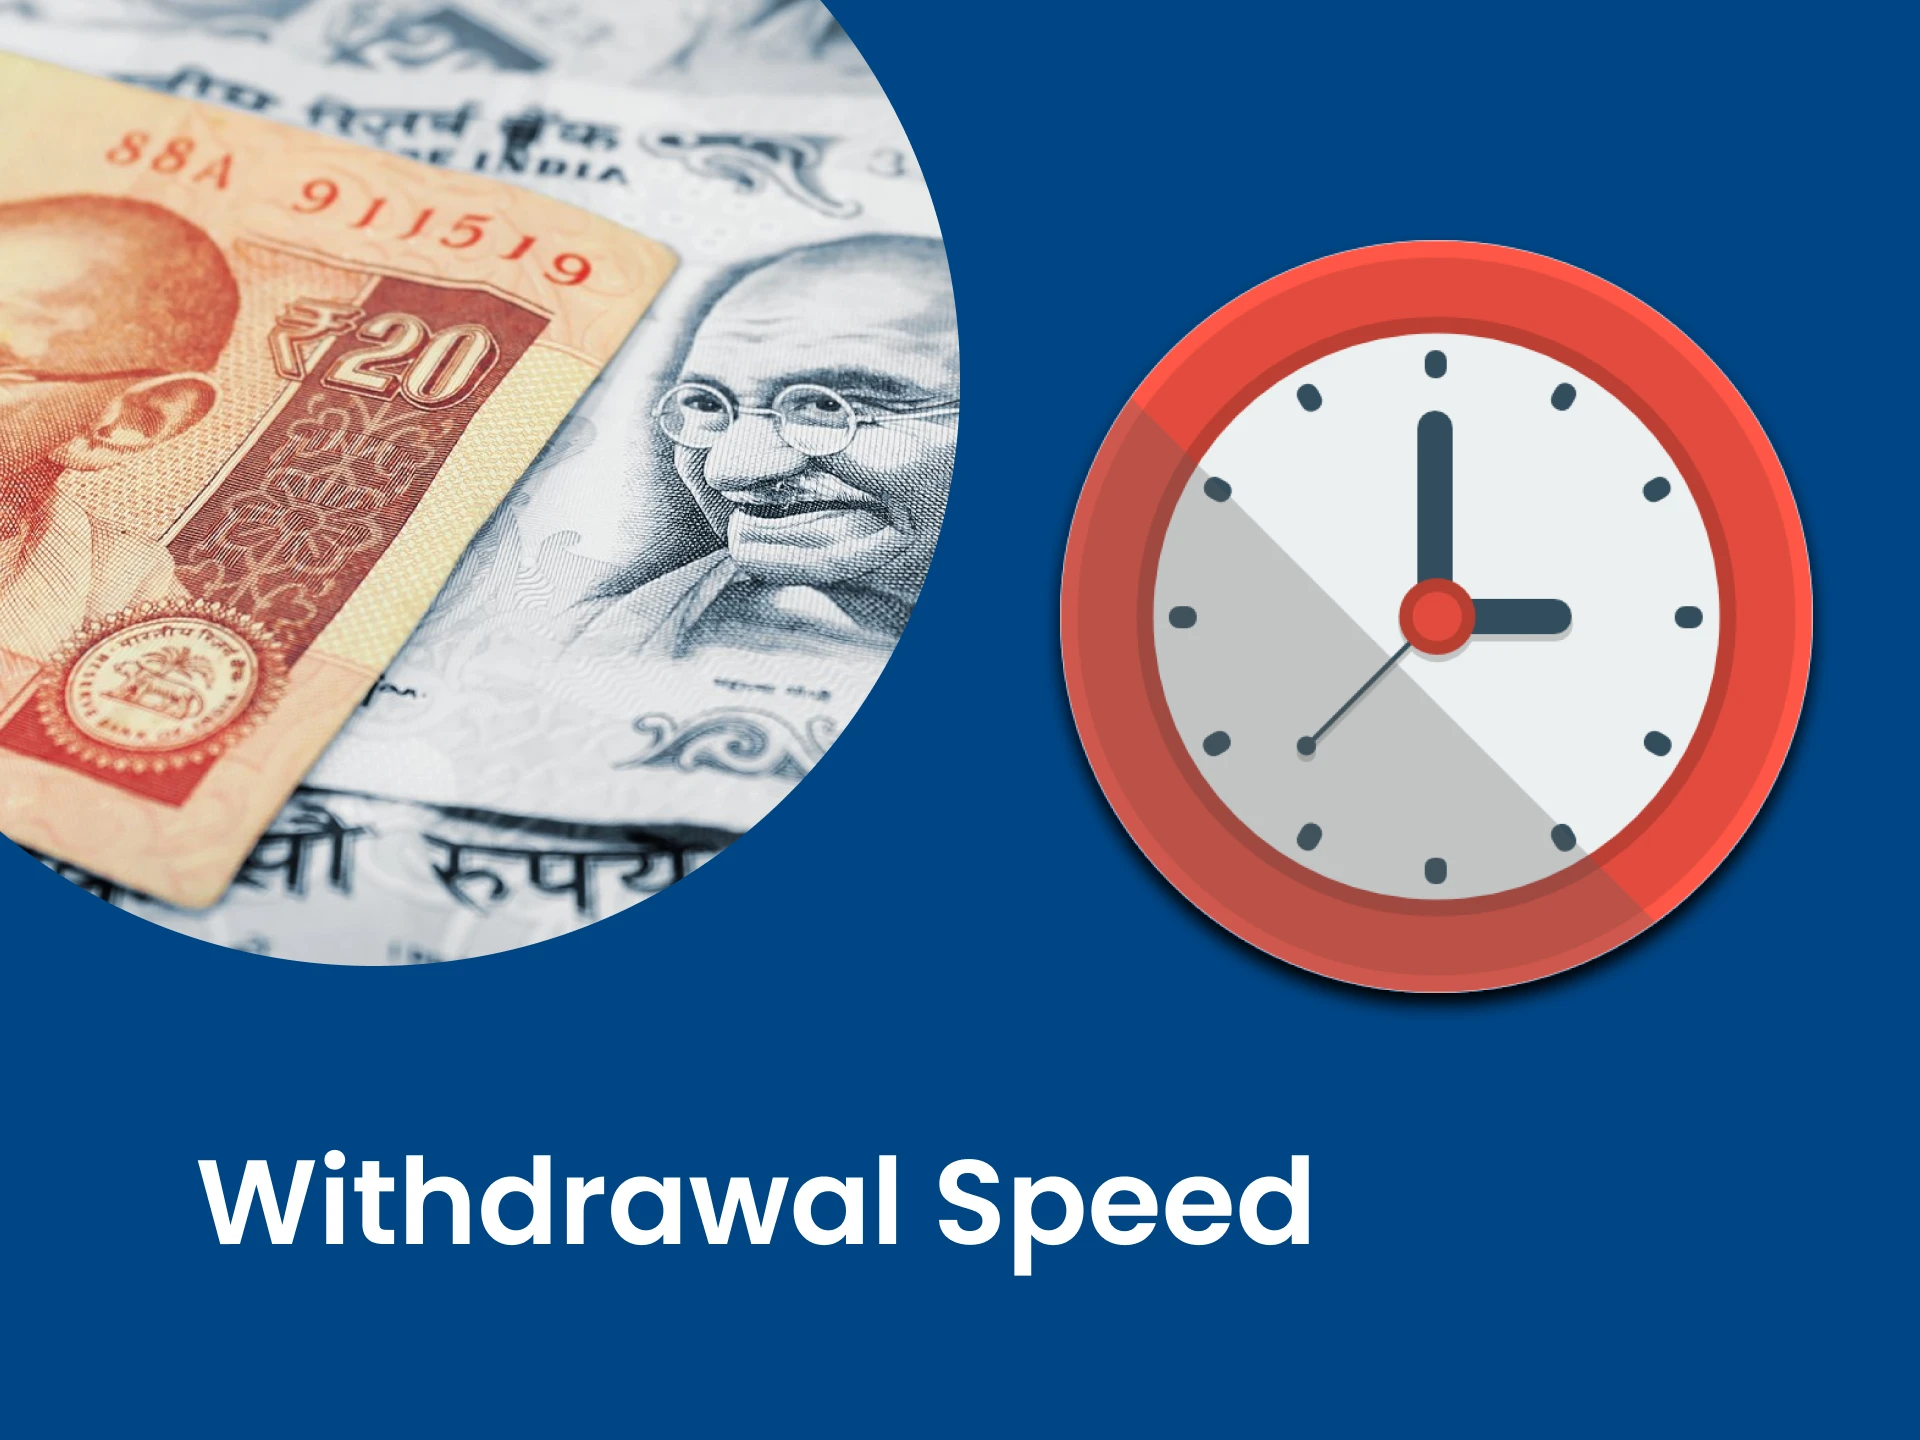 Choose a service with fast withdrawals.